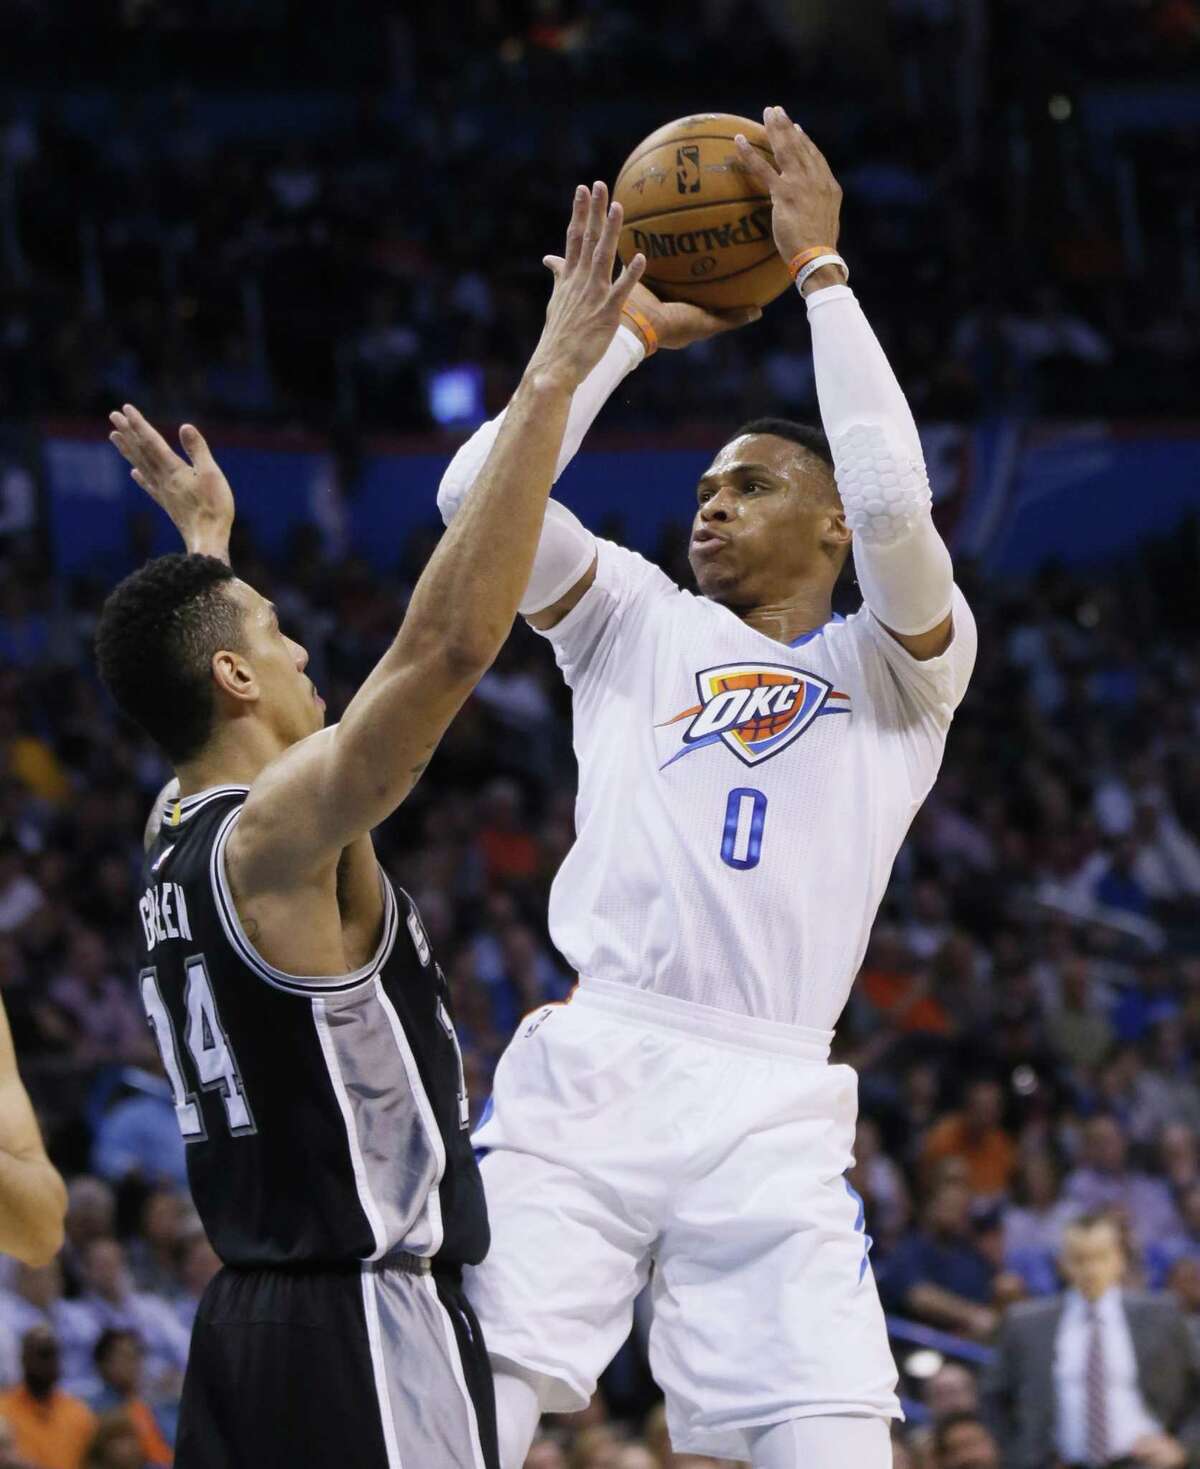 Thunder guard Russell Westbrook (0) shoots in front of Spurs guard Danny Green (14) during the first quarter in Oklahoma City on March 9, 2017.